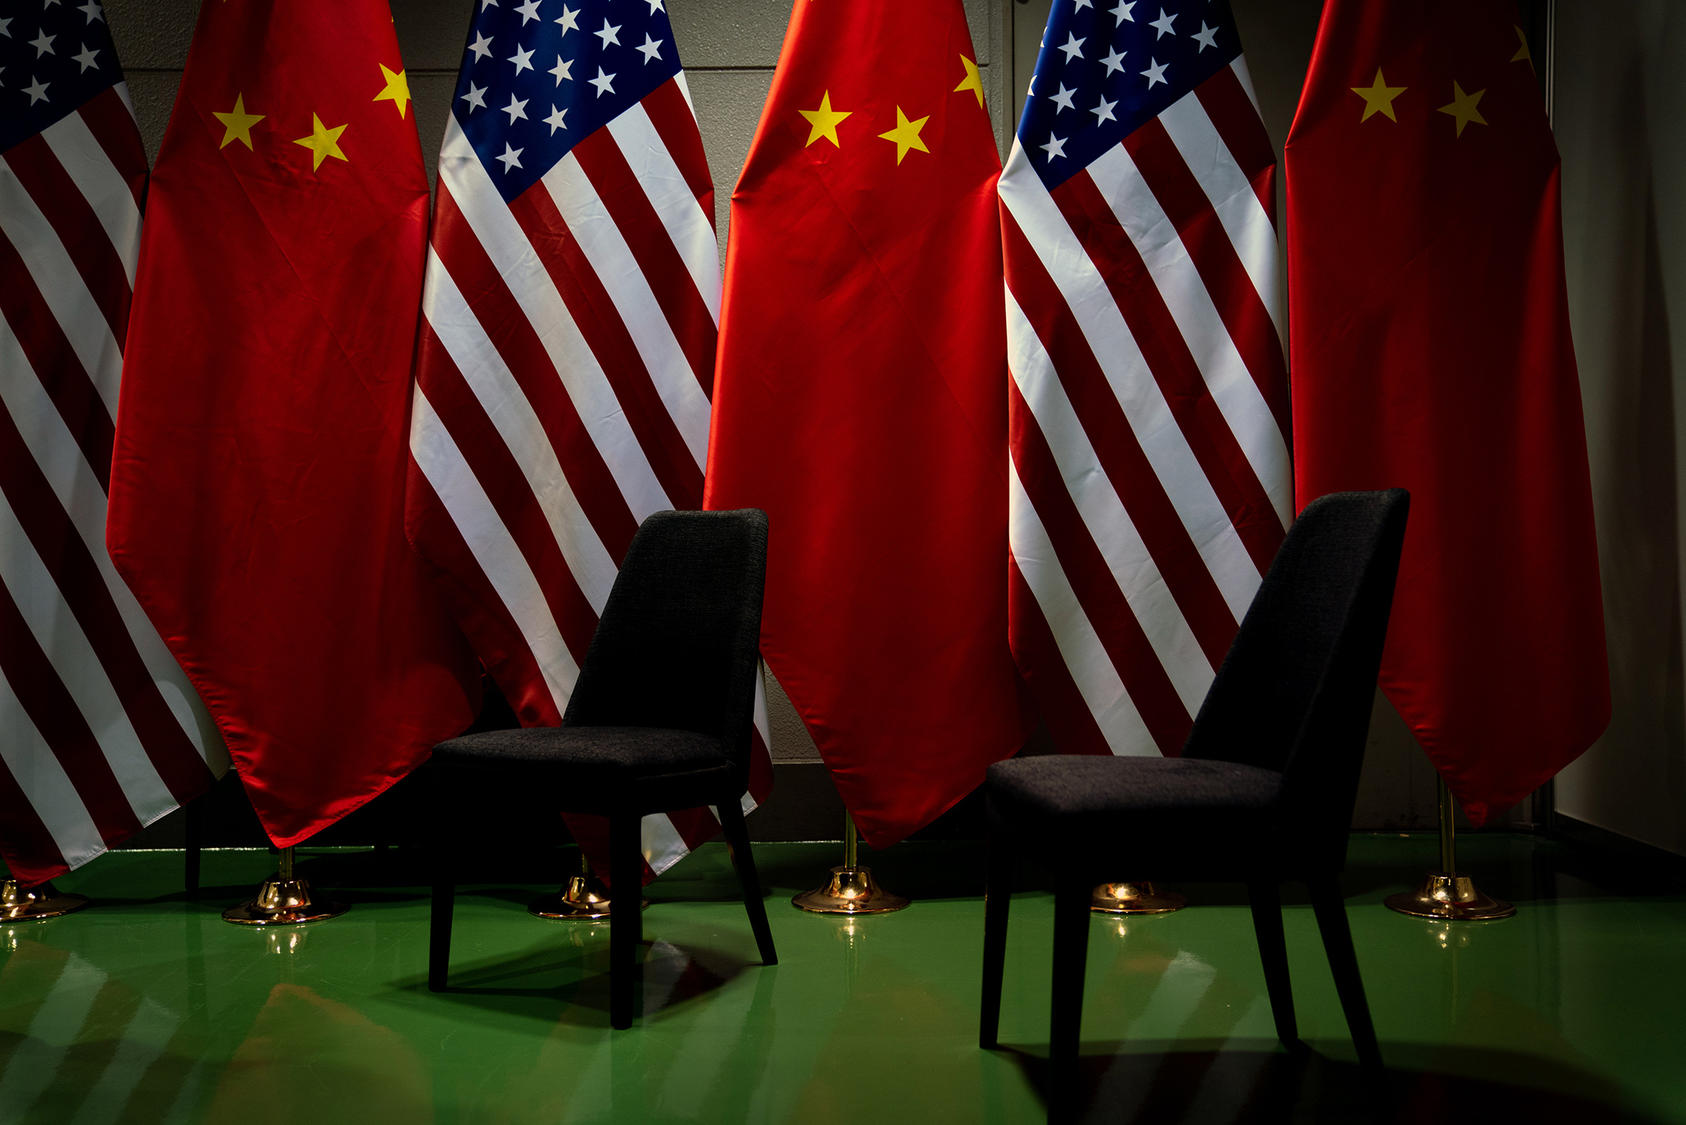 Flags at a U.S.-China bilateral meeting during the G20 summit in Osaka, Japan, in June 2019. (Erin Schaff/New York Times)